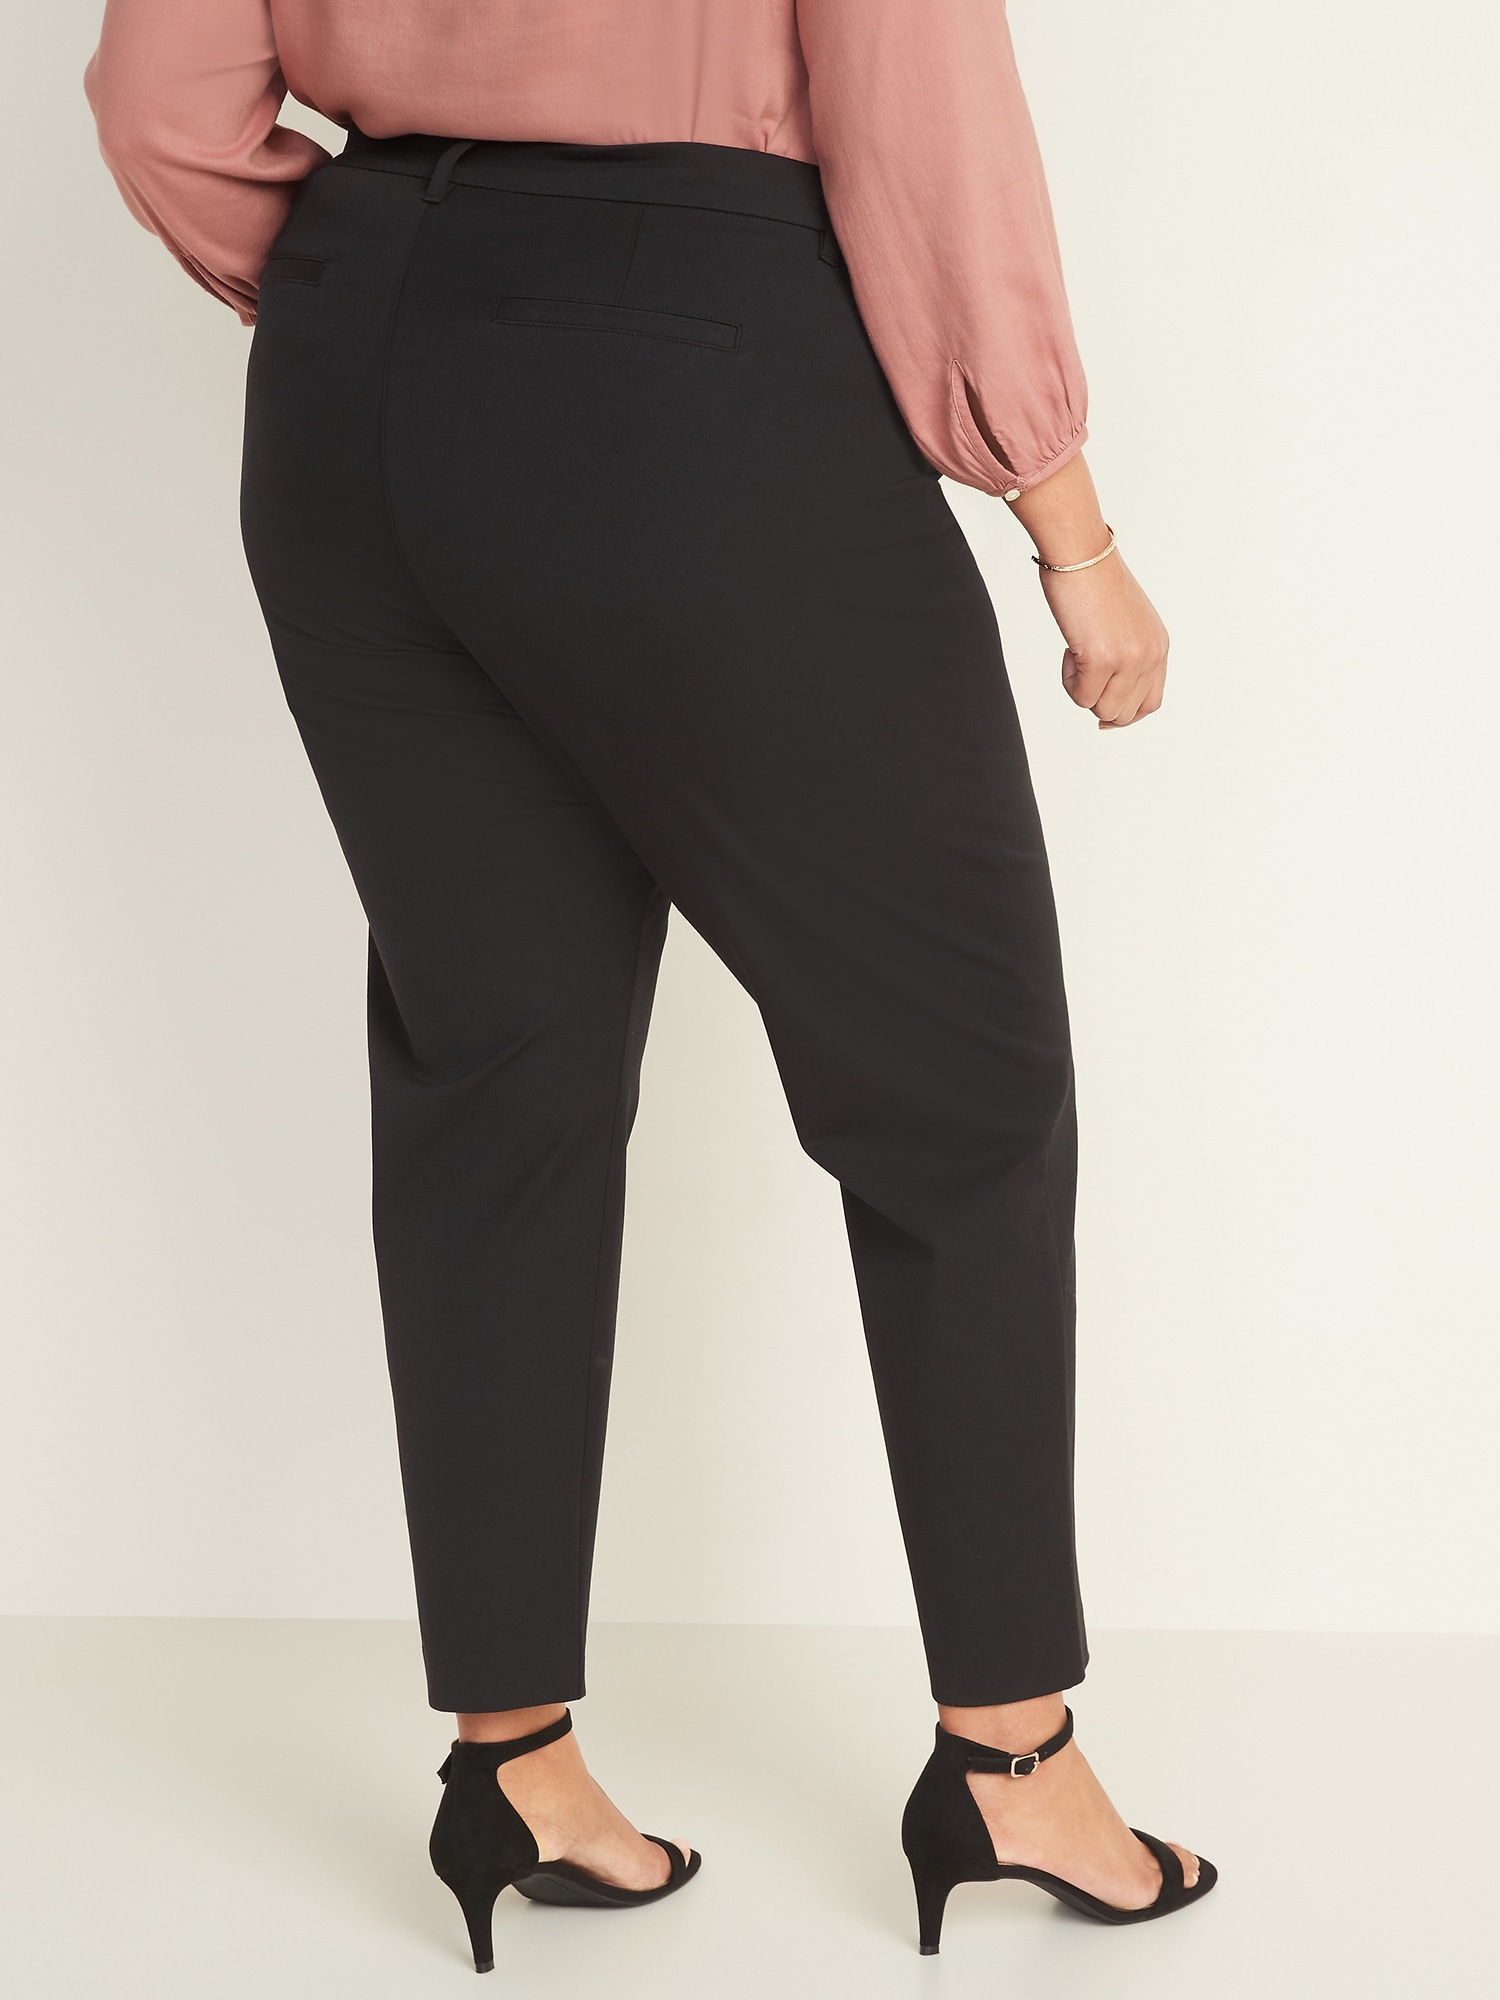 High-Waisted Plus-Size Pixie Pants | Old Navy